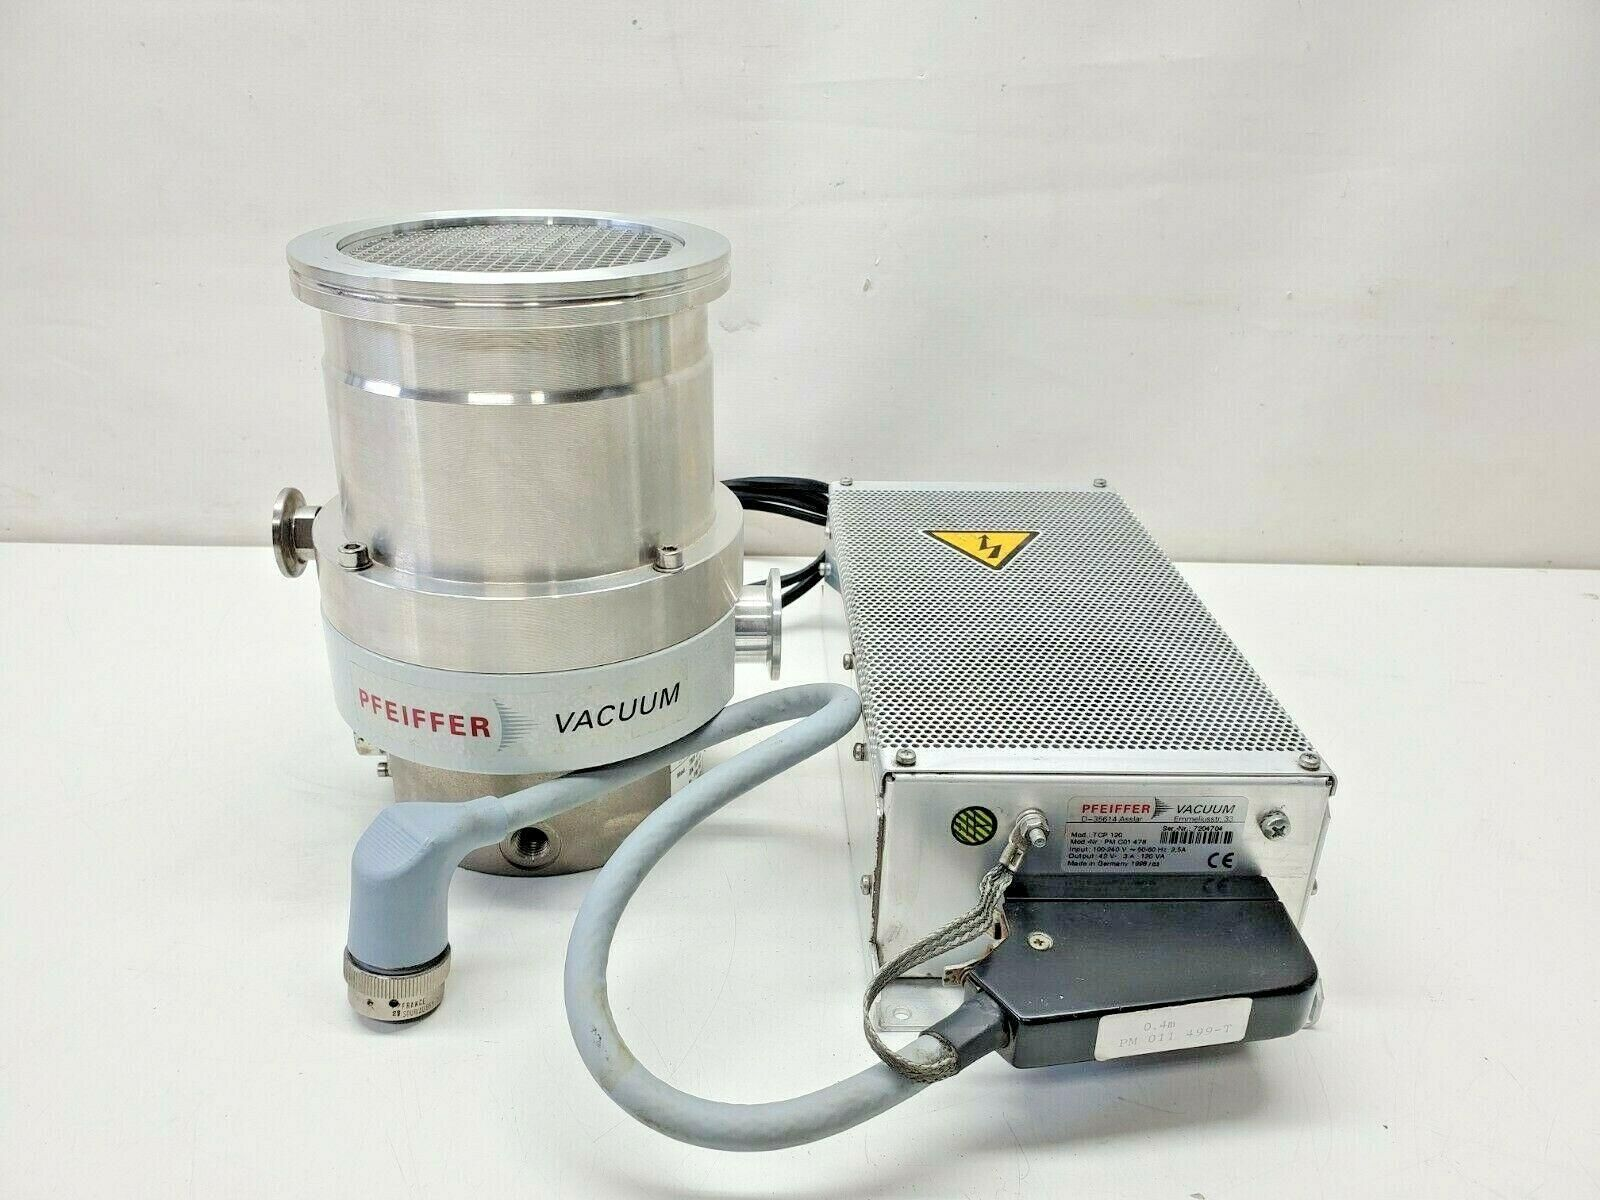 Pfeiffer TMH 260 Turbo Molecular Vacuum Pump w/ TCP 120 Controller and Cable